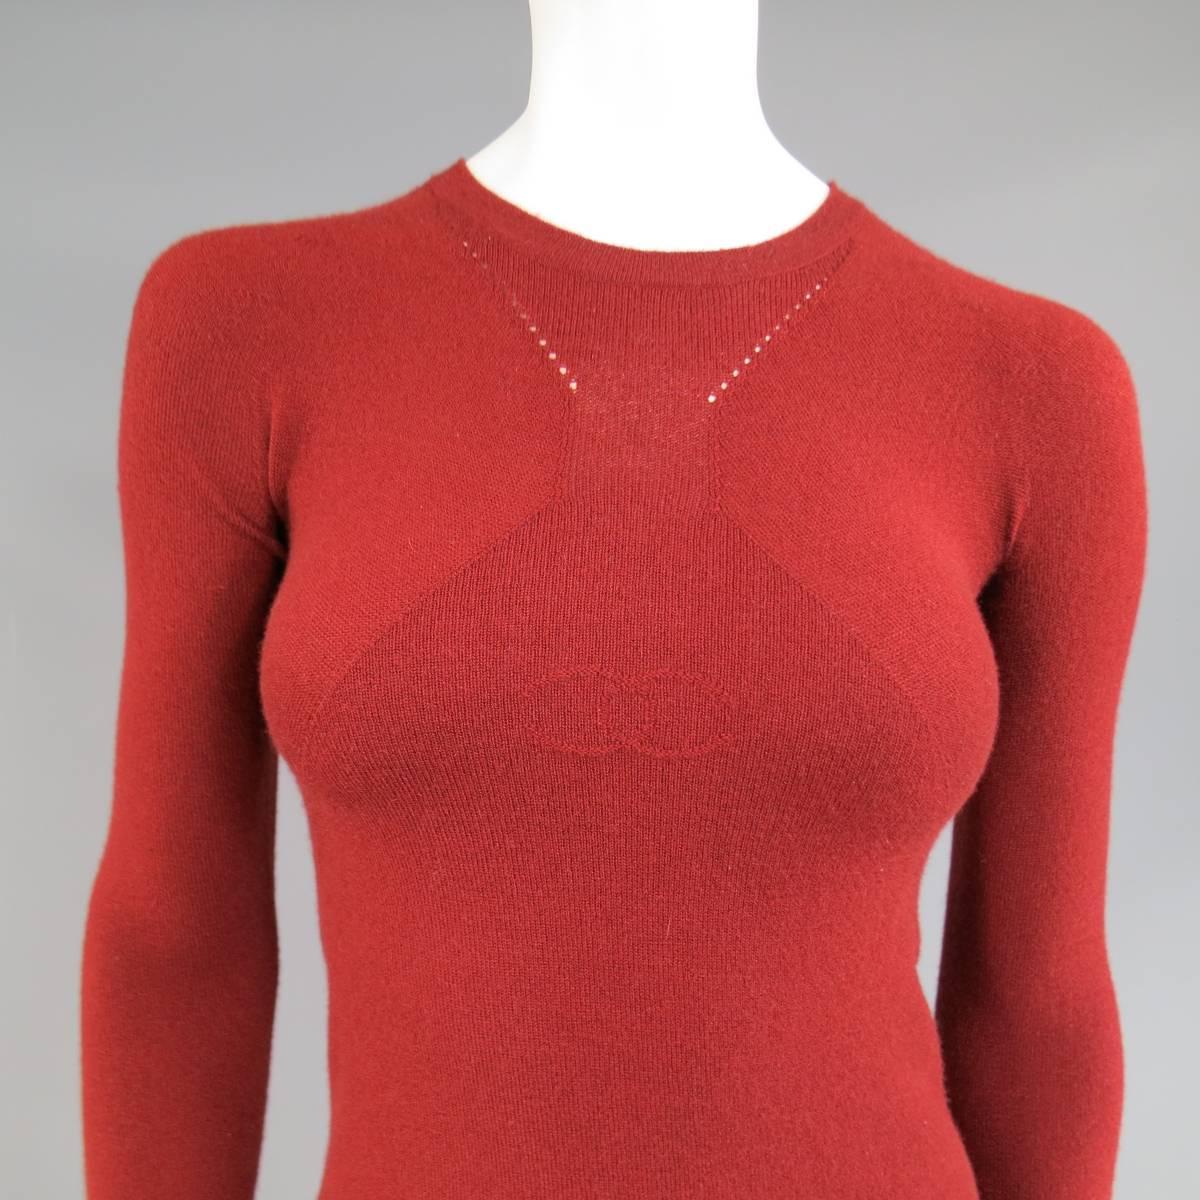 This unique CHANEL pullover sweater comes in rich brick red stretch cashmere blend and features a crewneck, symmetrical geometric sheer panels, and logo on the chest. Made in Italy. Fall / Winter 2006.
 
Excellent Good Pre-Owned